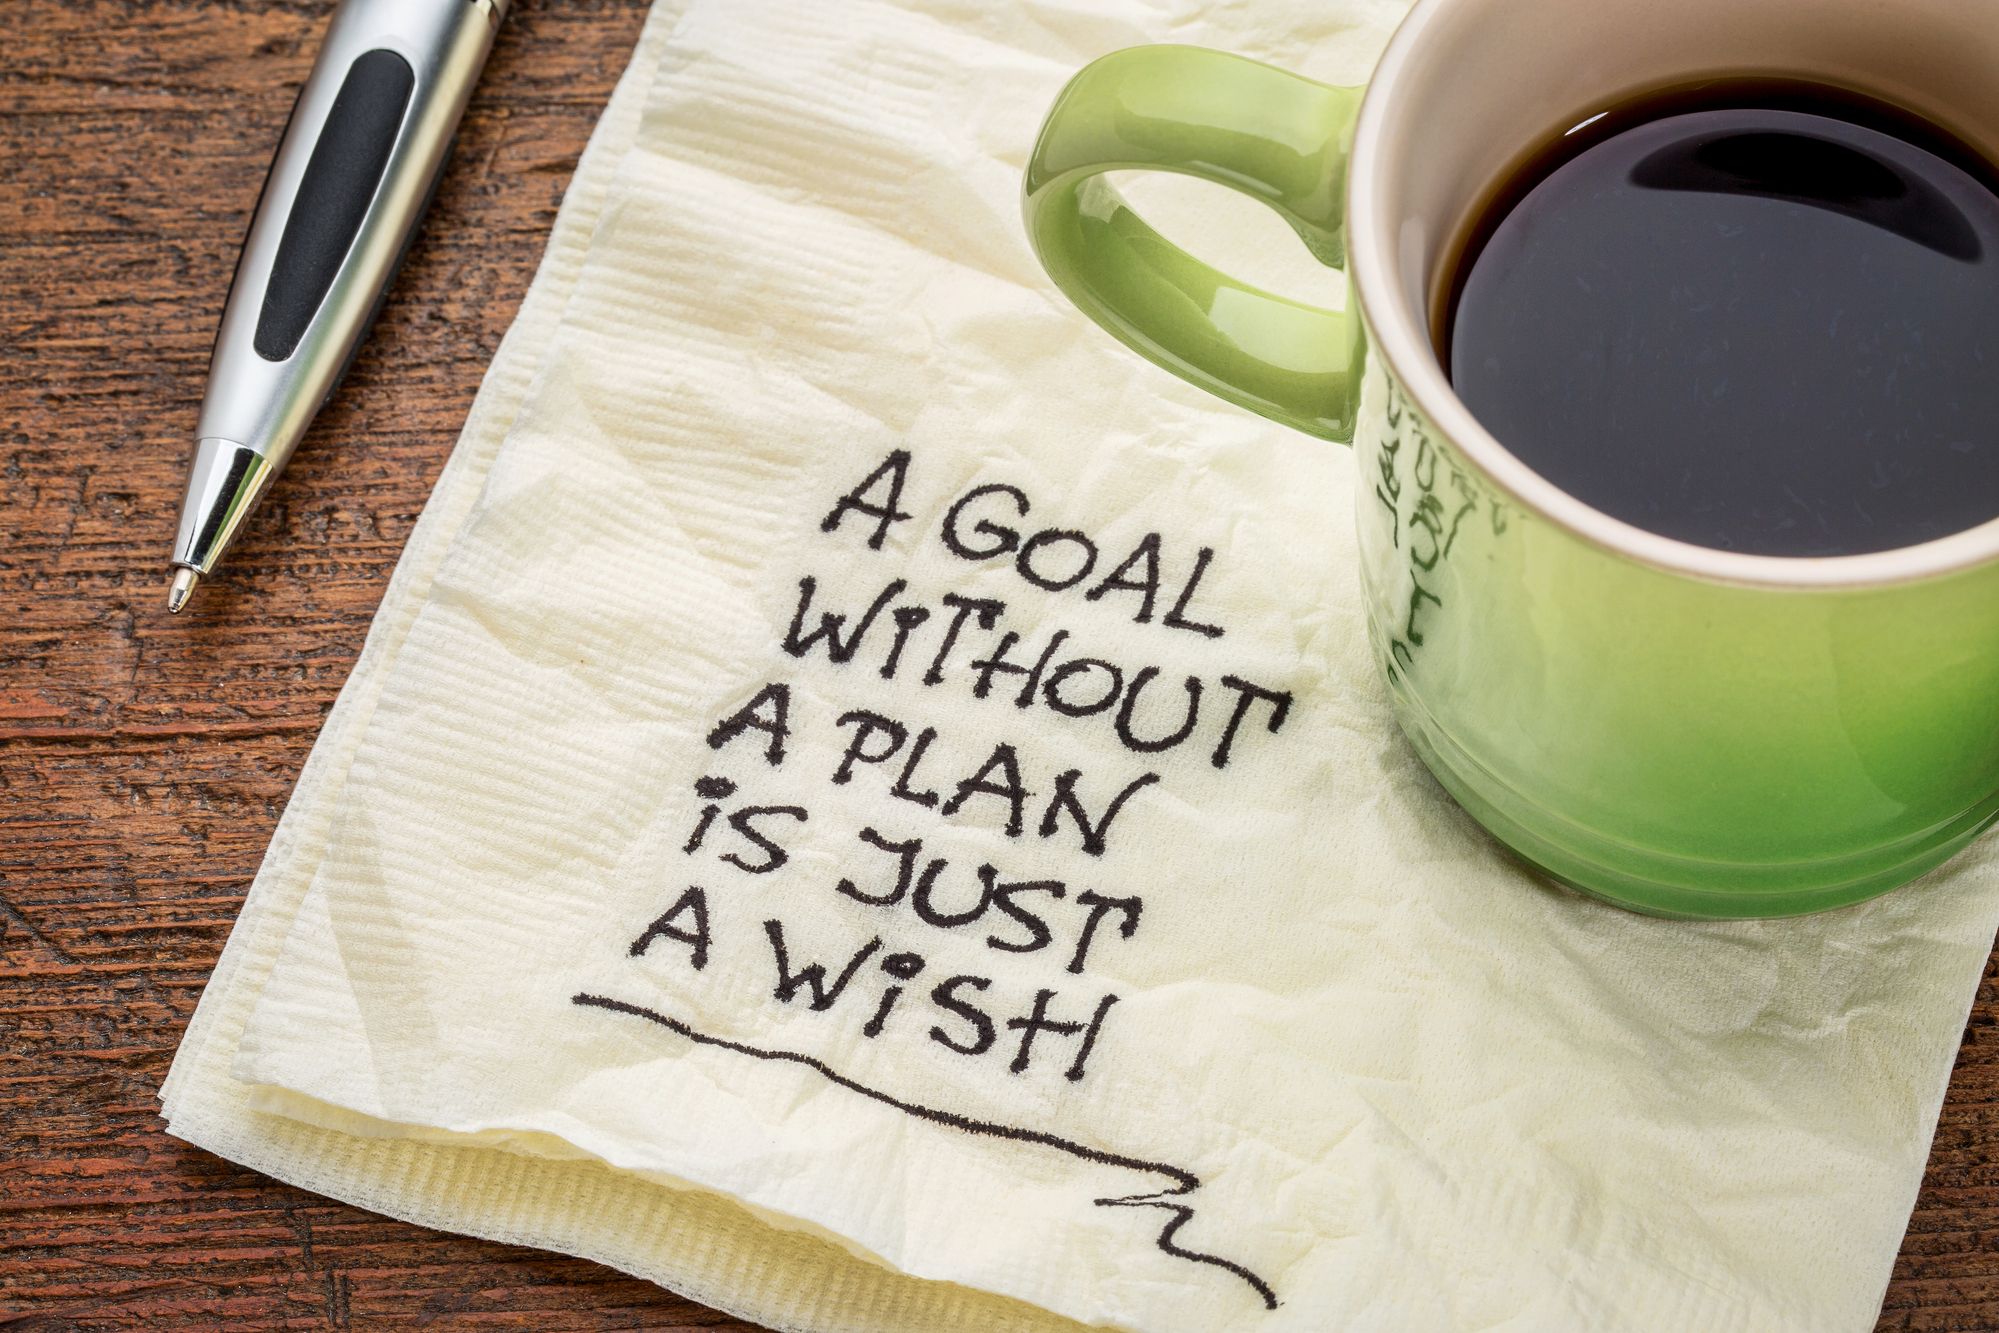 A goal without a plan is just a wish written on a napkin